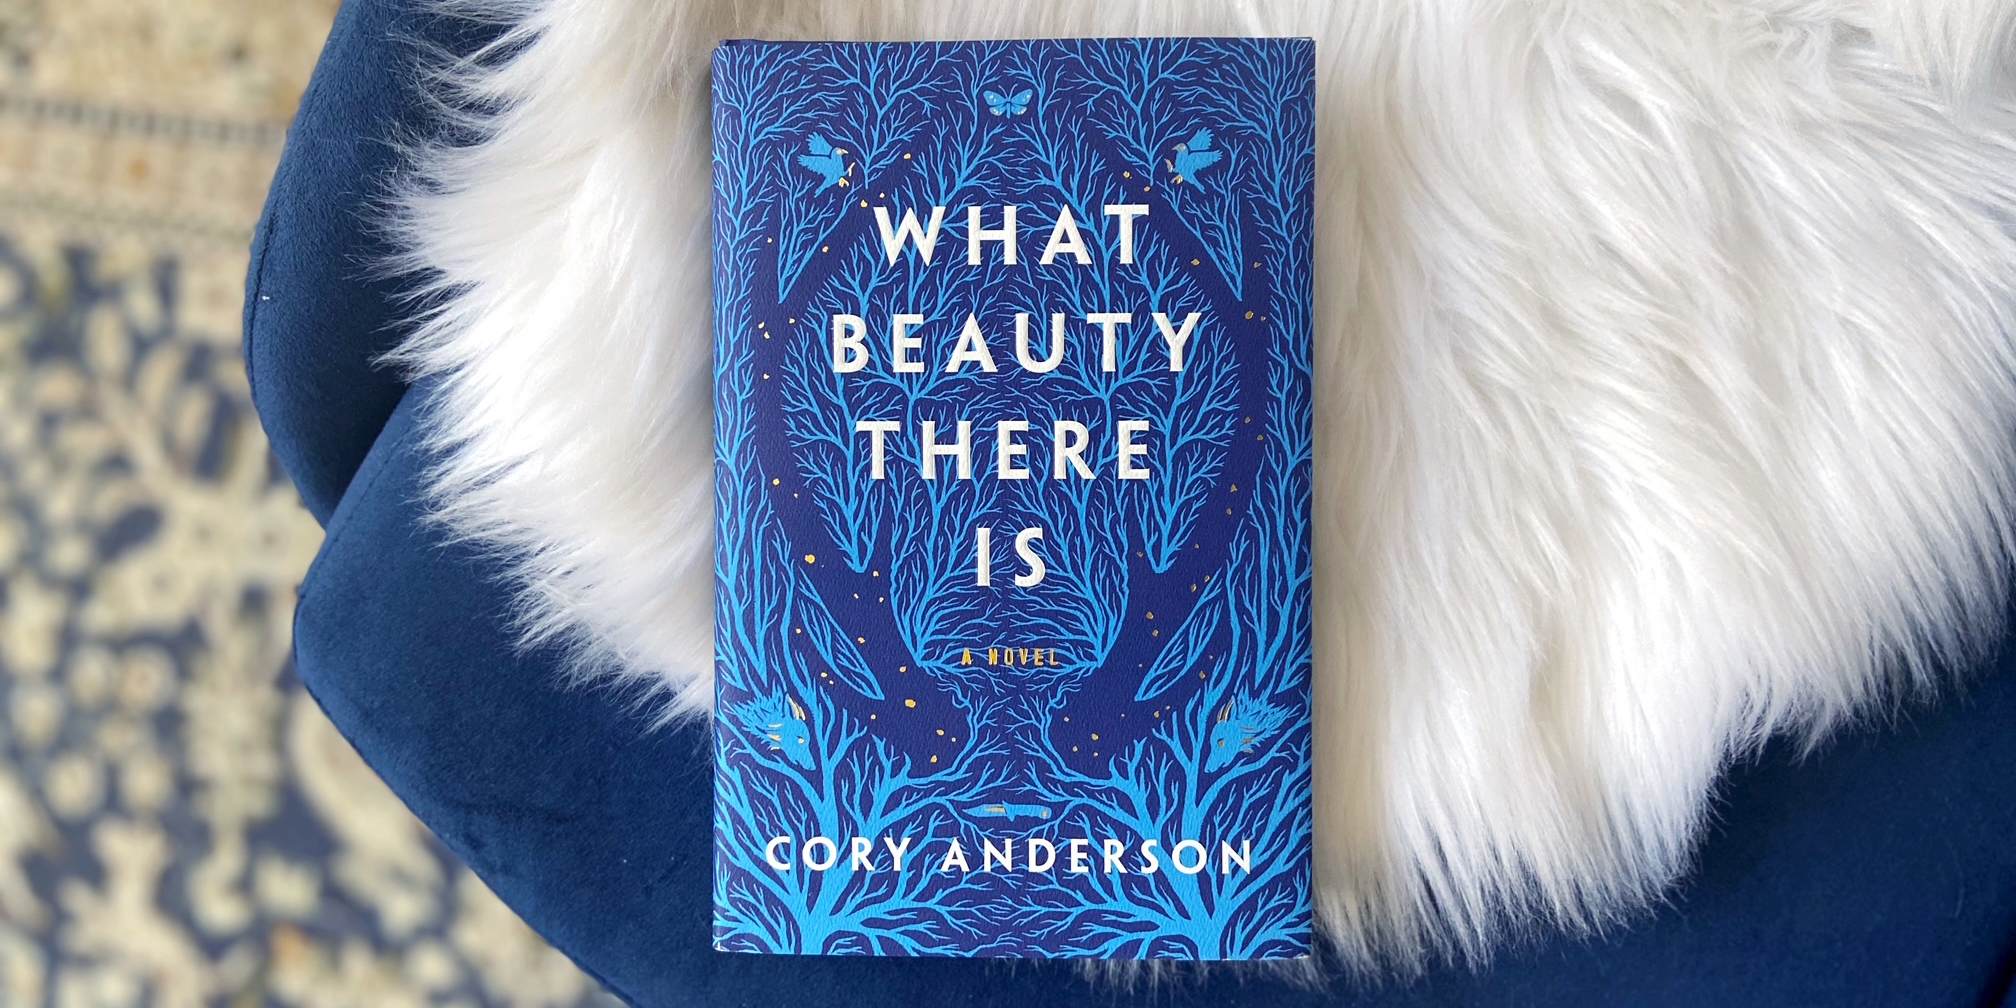 An Interview with Cory Anderson, Author of What Beauty There Is